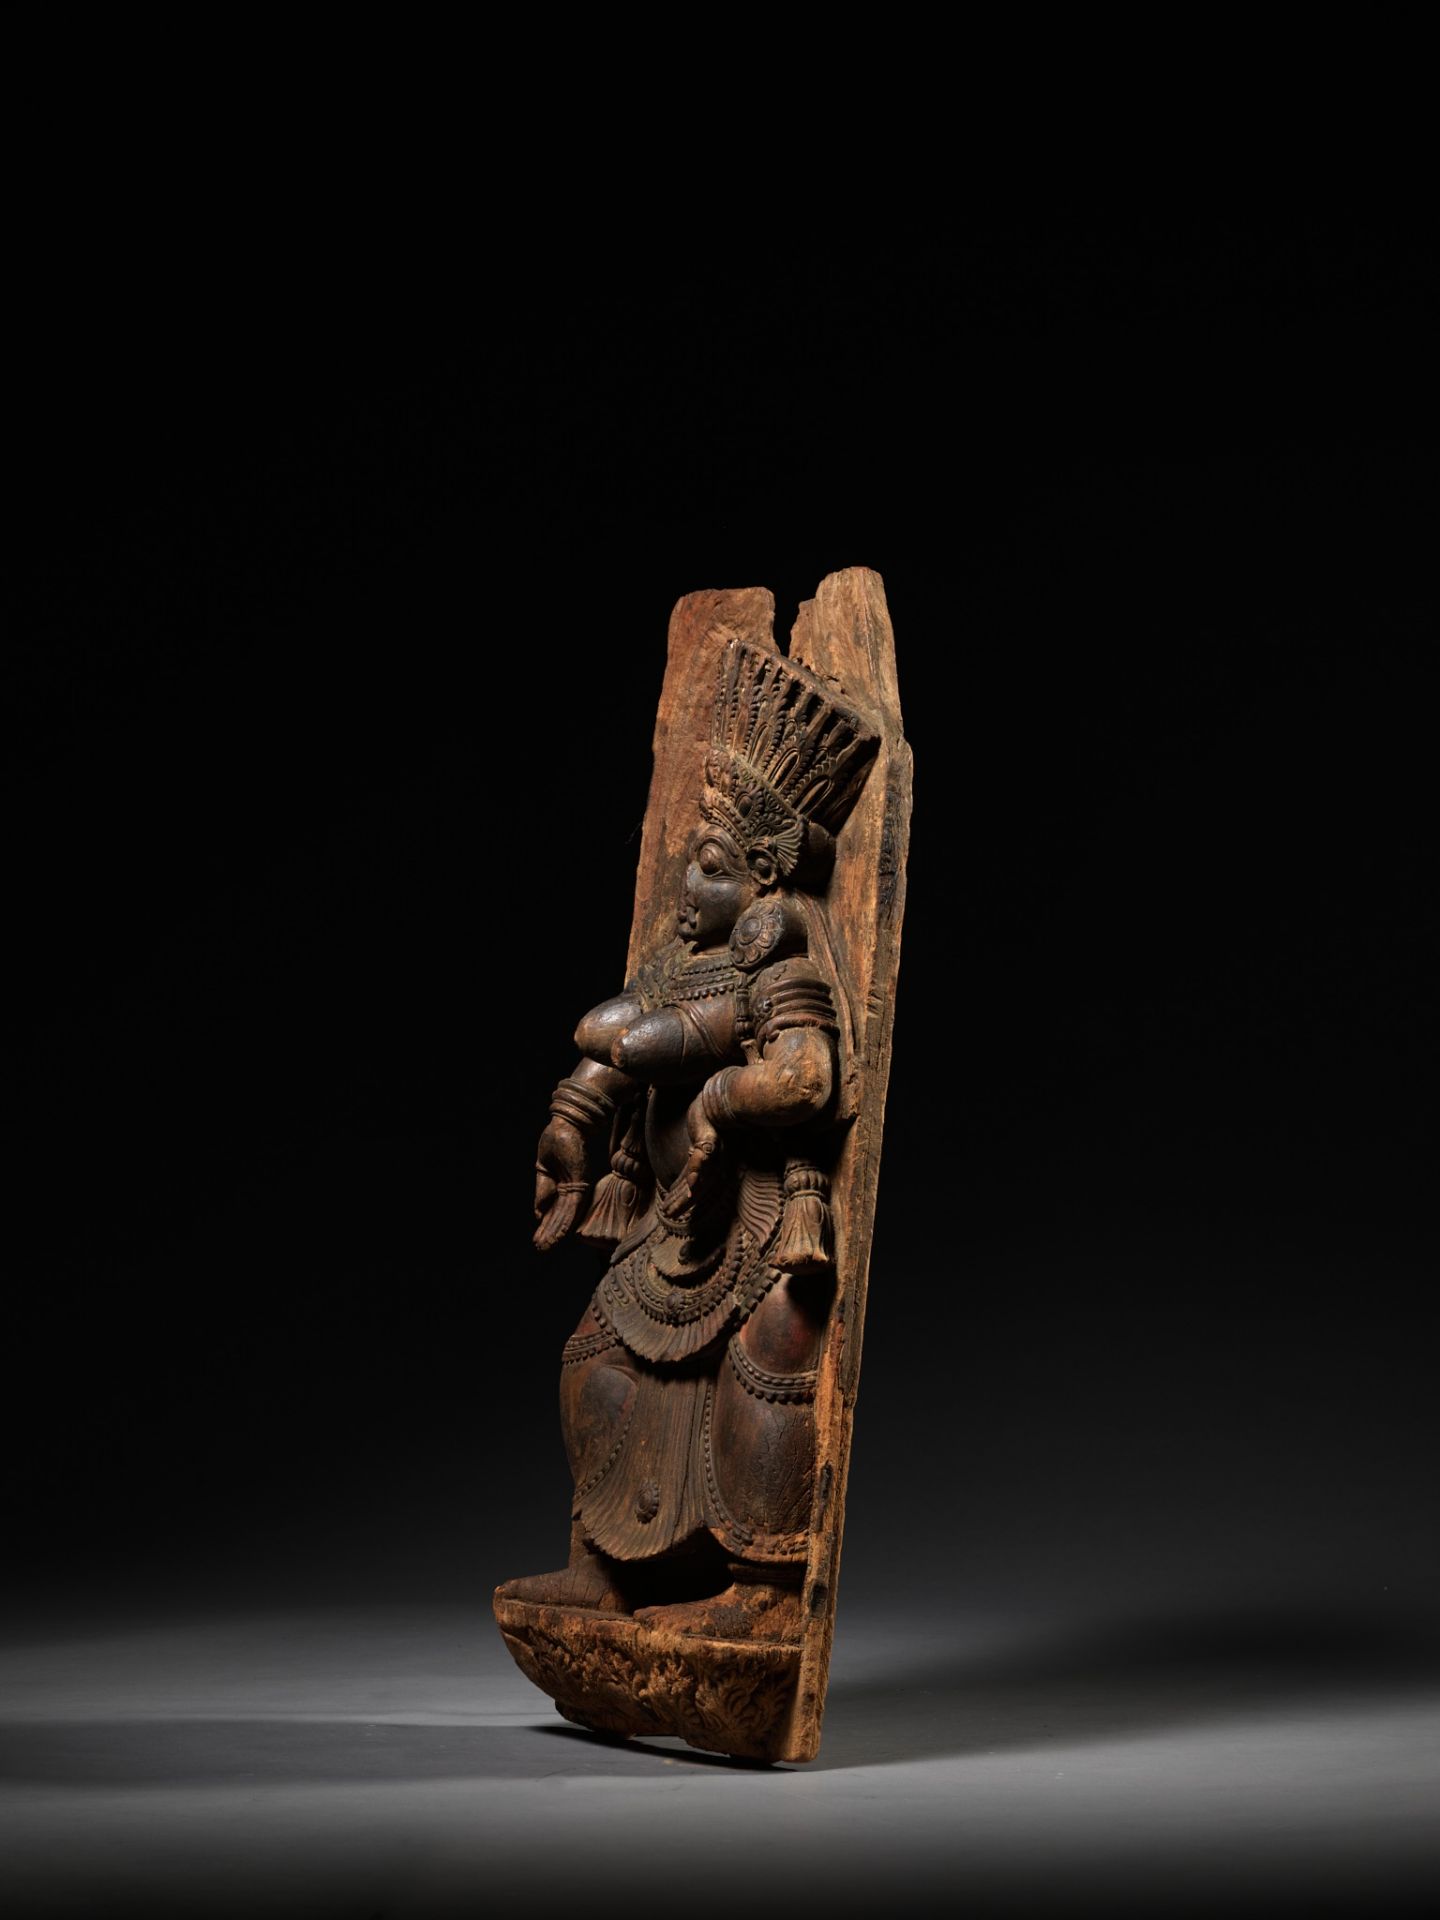 A LARGE AND HIGHLY IMPRESSIVE WOOD RELIEF OF A DANCING FEMALE DEMON, KERALA, SOUTH INDIA, 17TH CT - Image 8 of 8